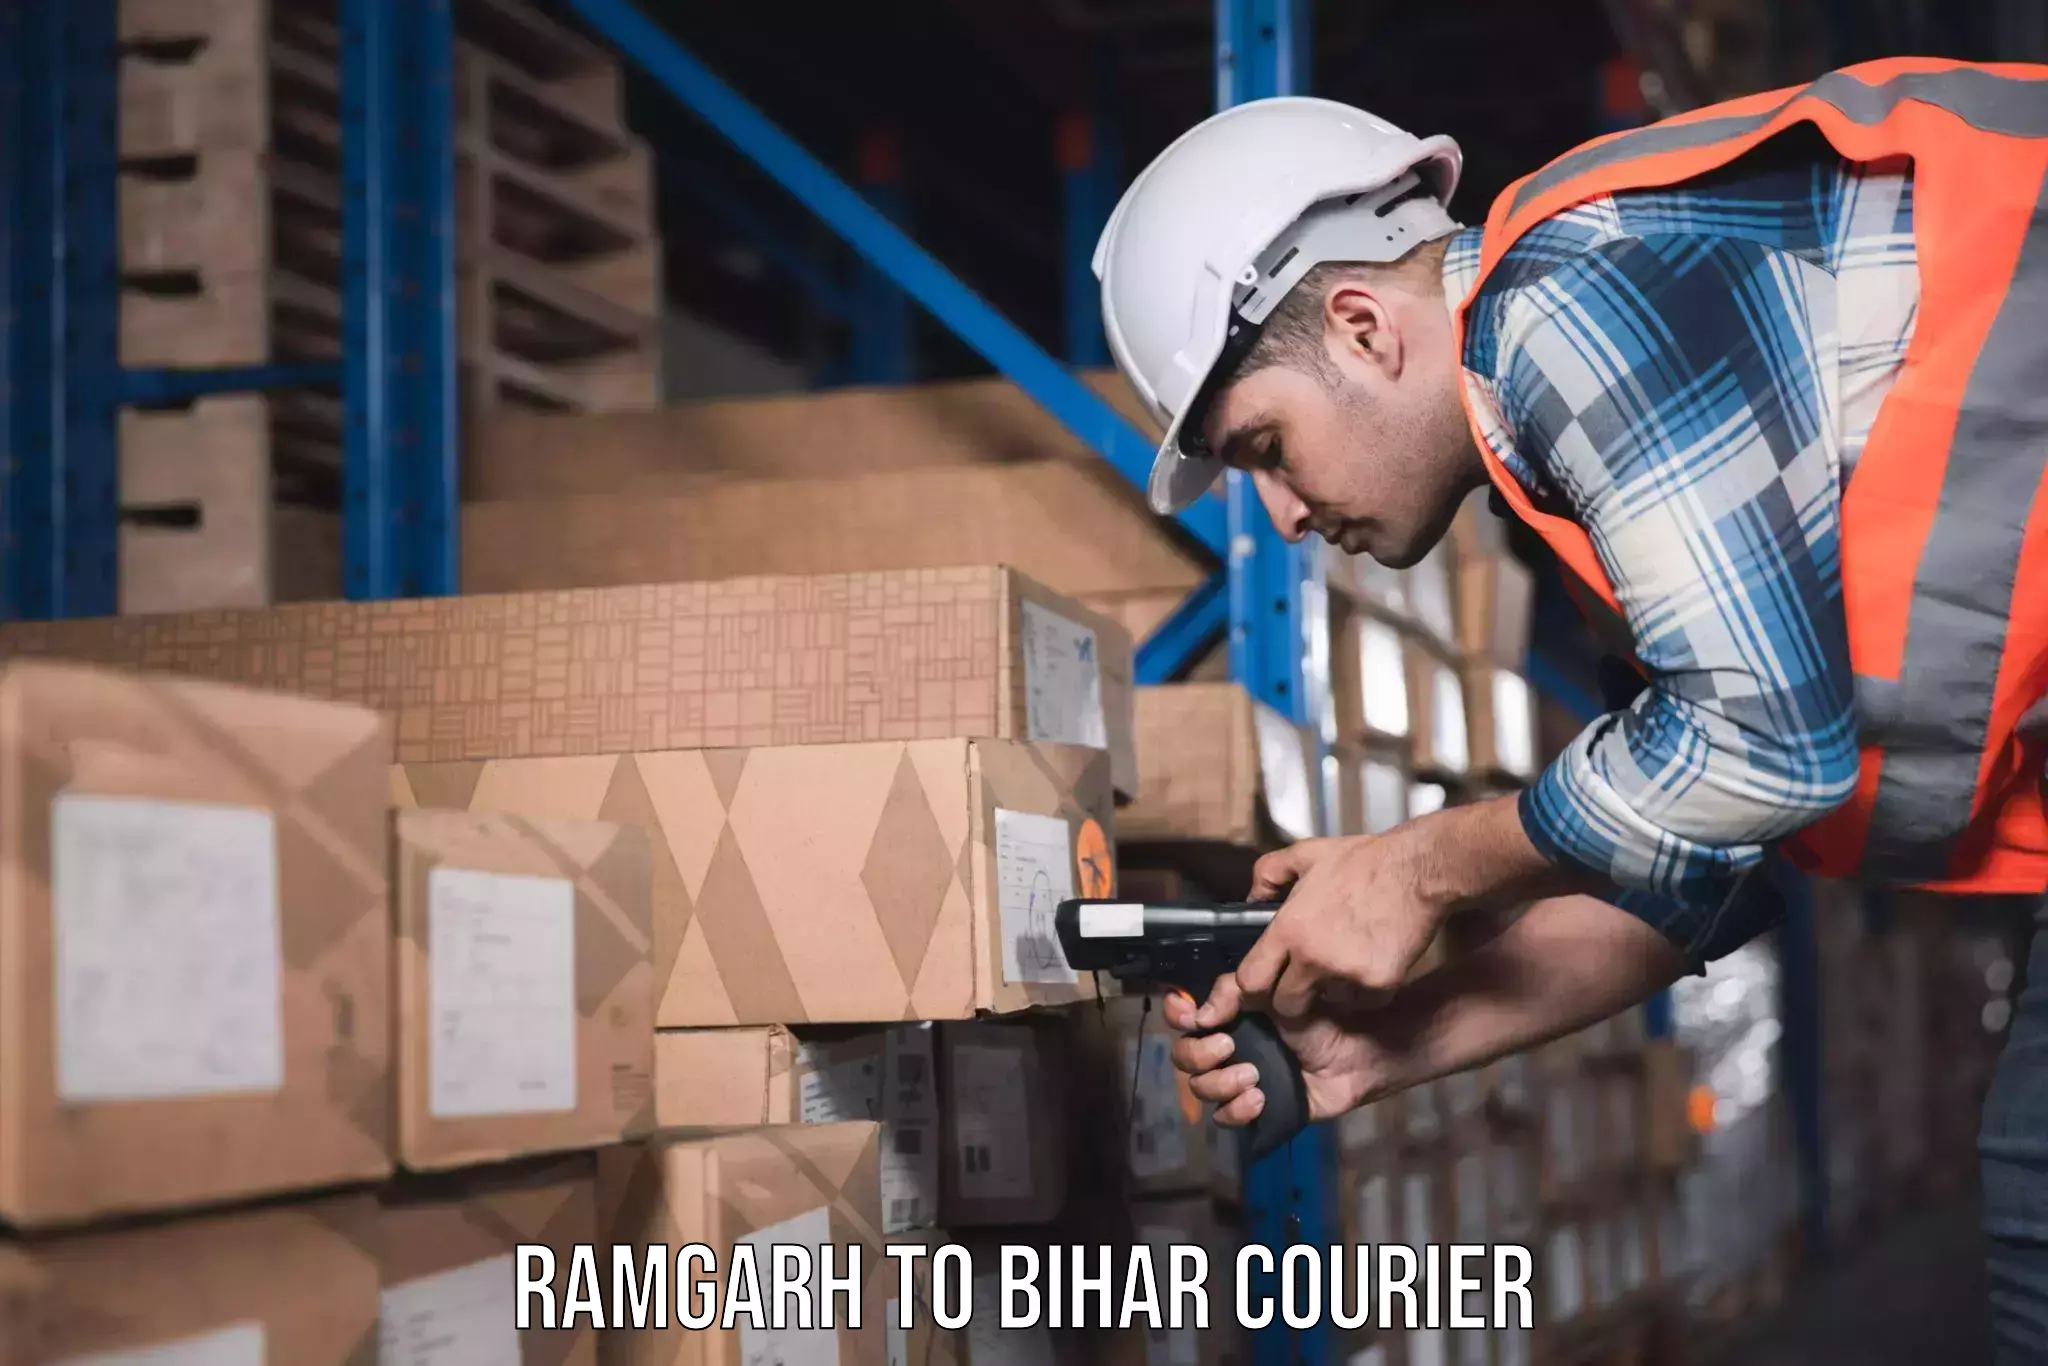 Quality relocation assistance in Ramgarh to Buxar